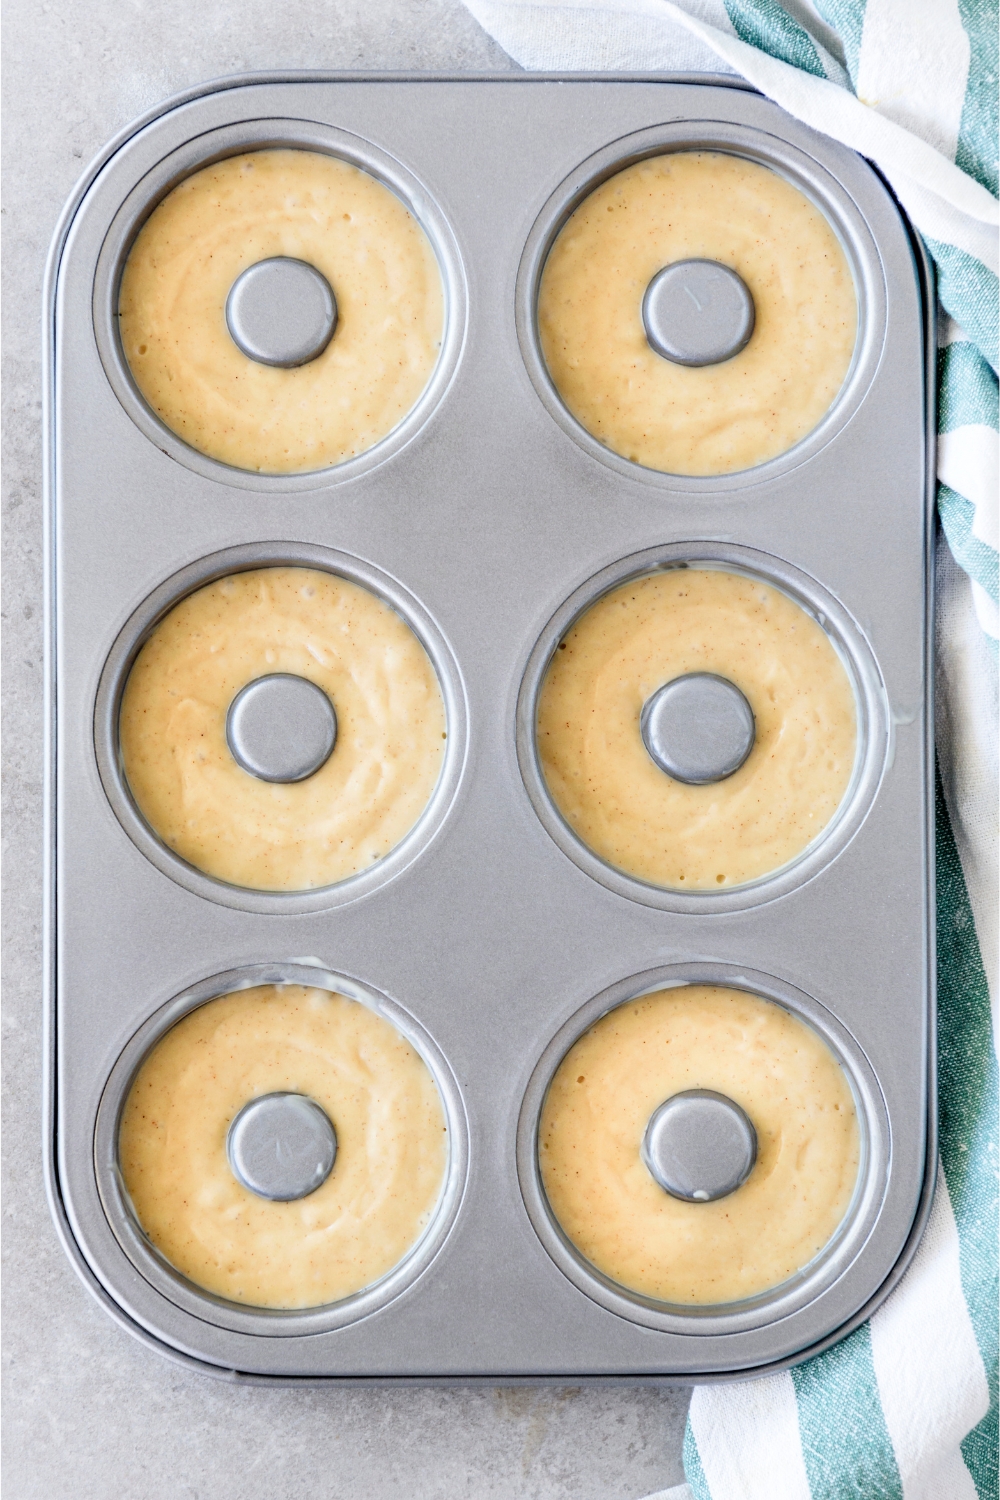 A doughnut baking pan with each spot filled with batter.